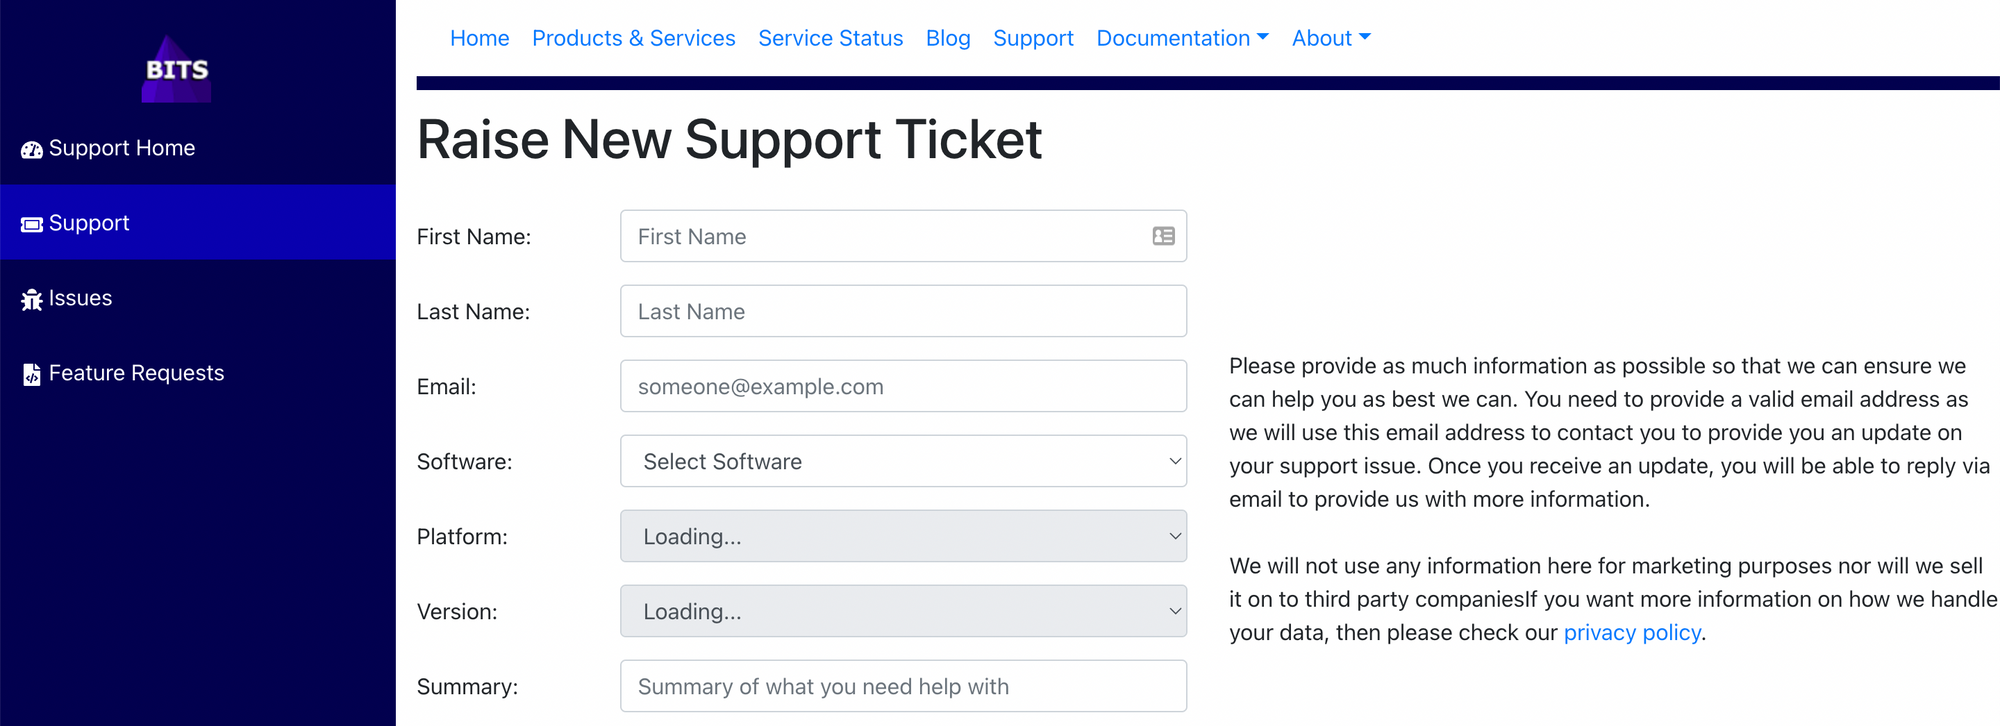 Current Support Portal - Raising New Support Ticket